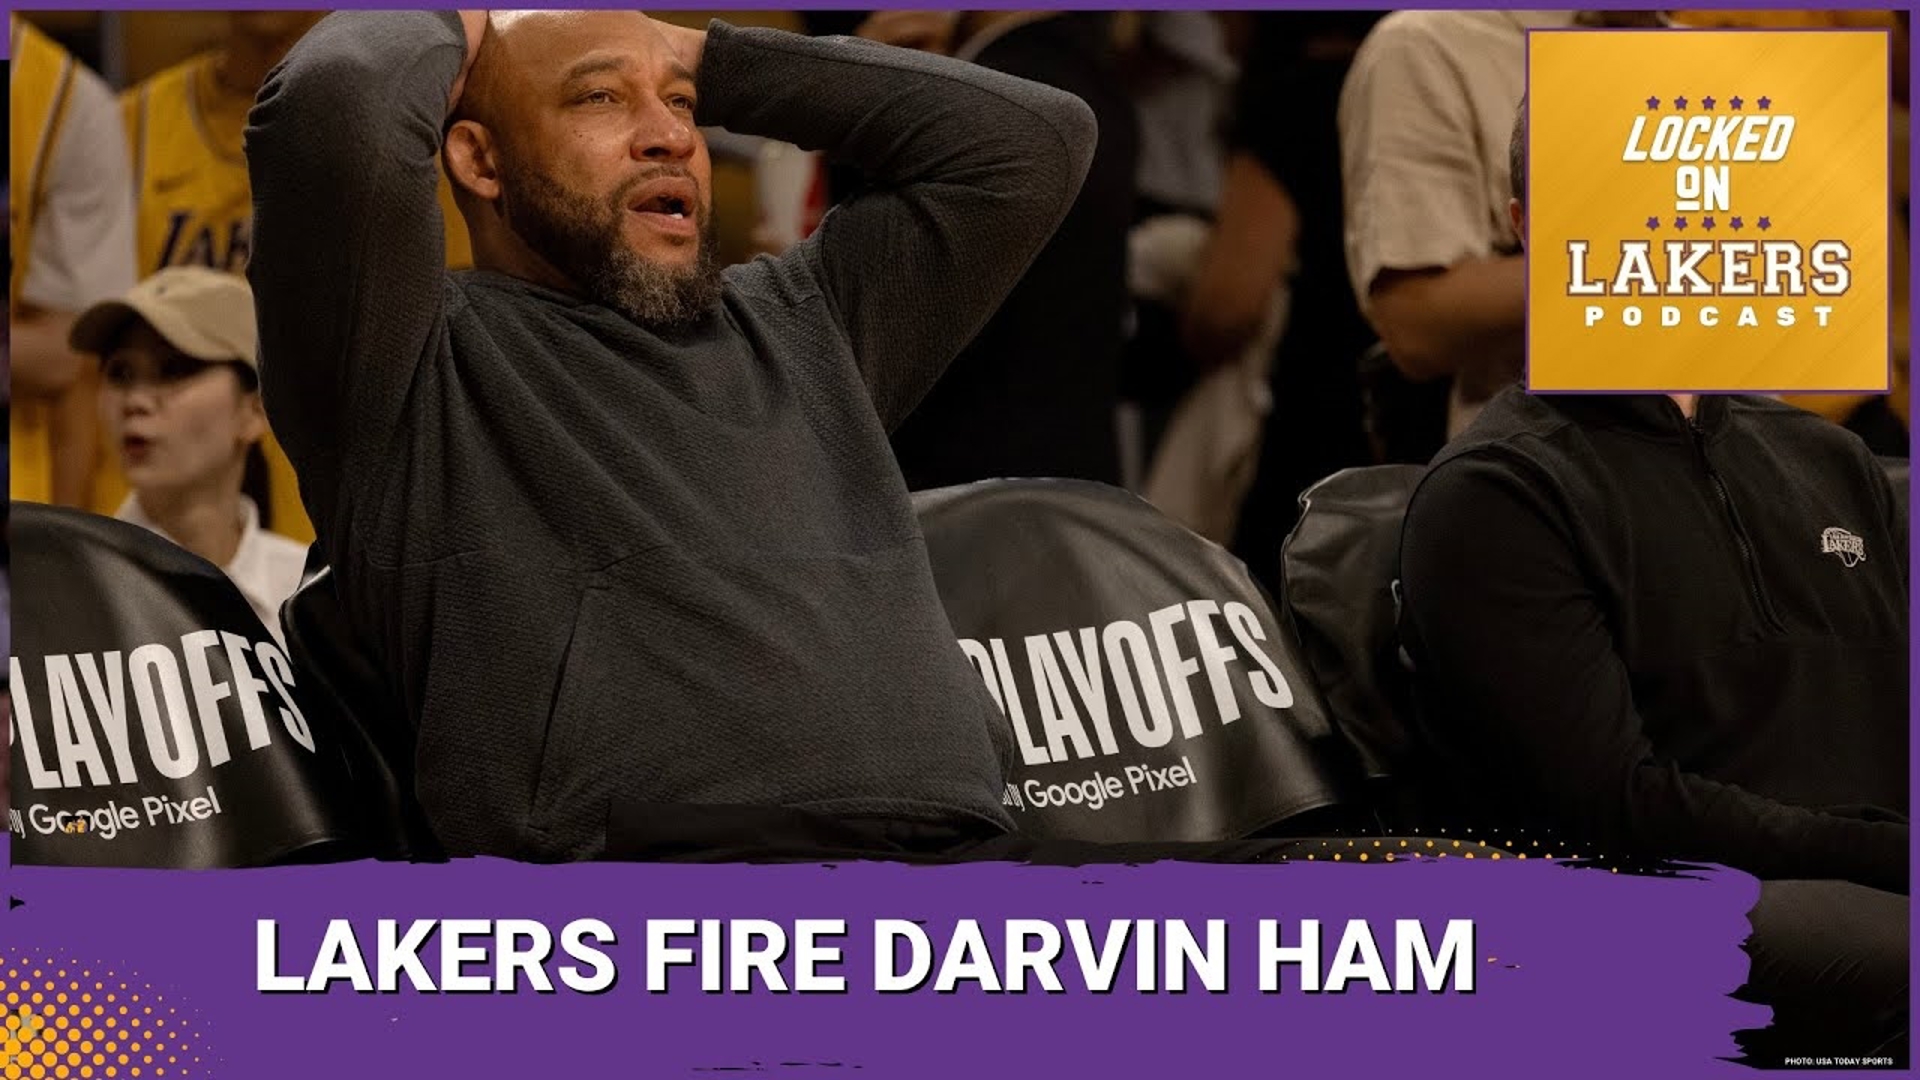 The inevitable just became reality. On Friday, the Lakers announced that Darvin Ham has been relieved of his duties as head coach of the Lakers.